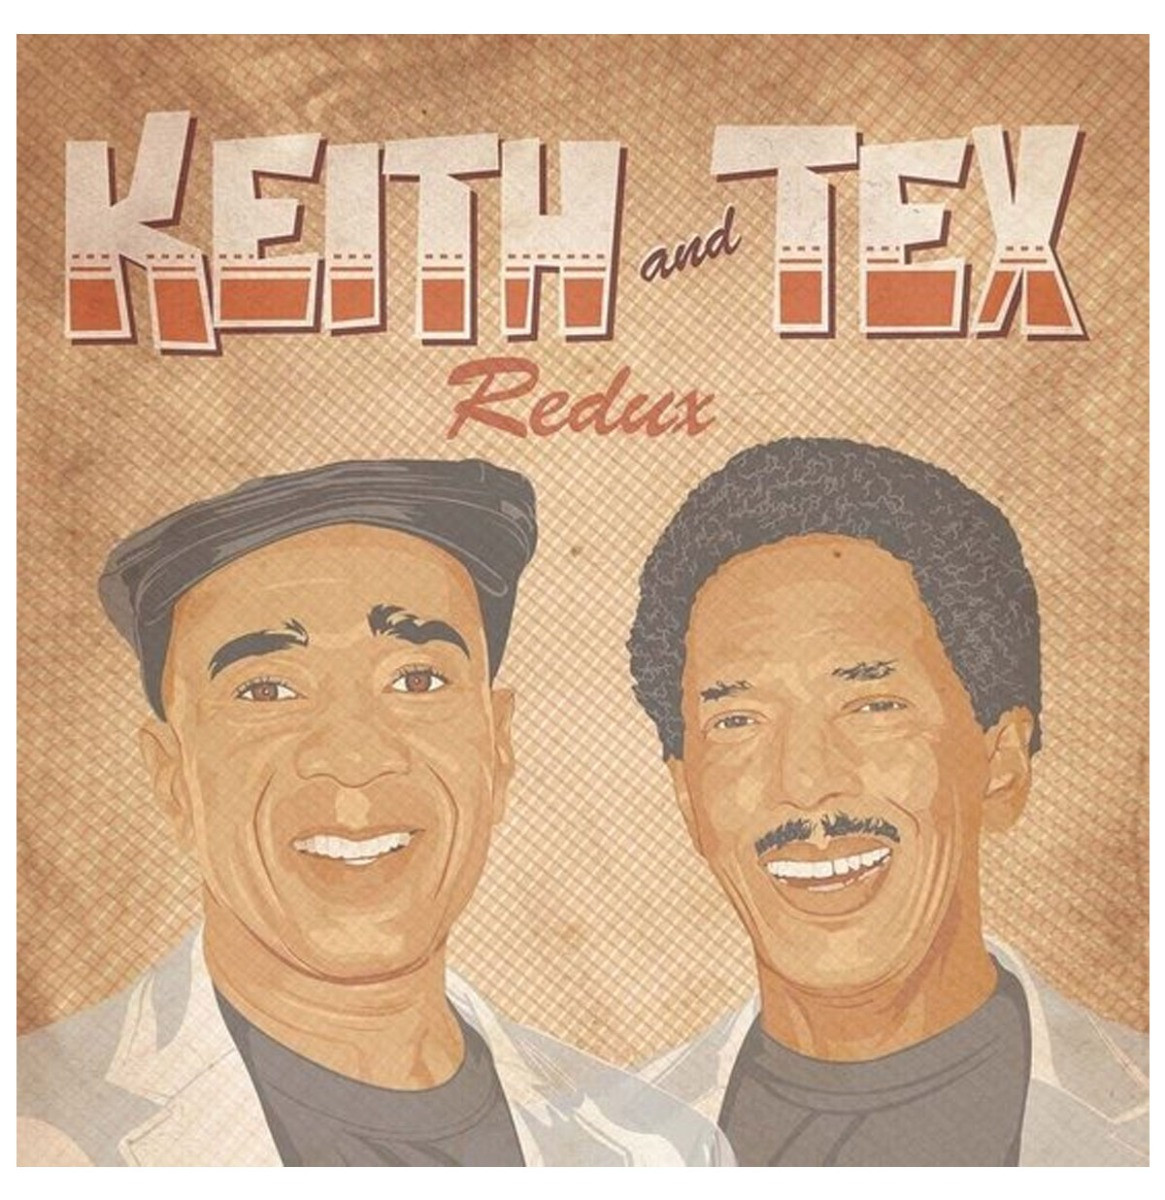 Keith And Tex - Redux LP